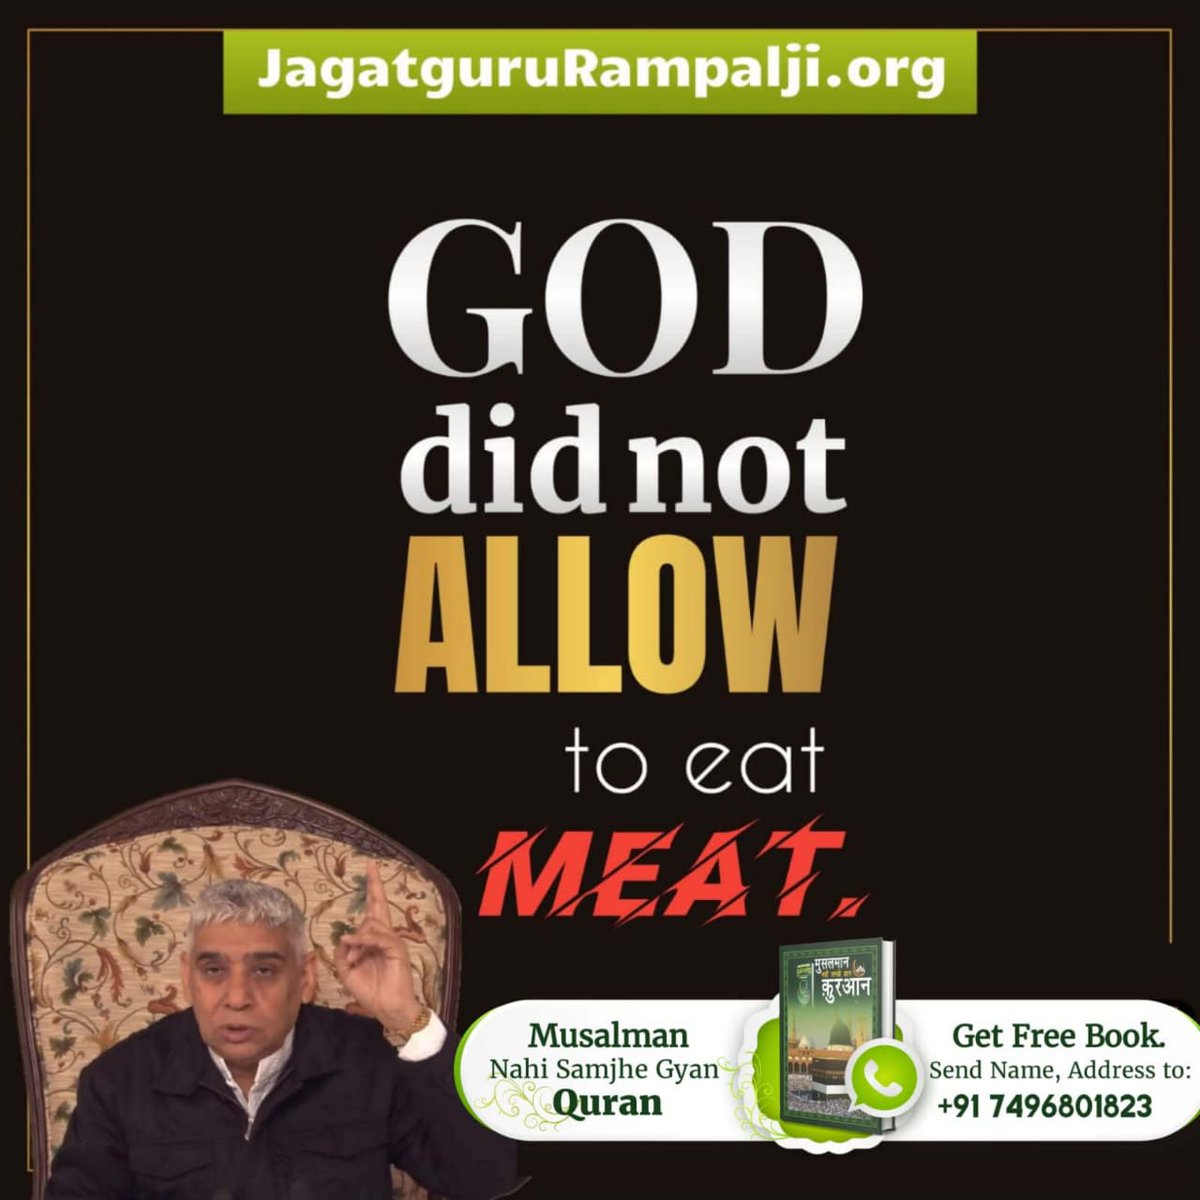 #रहम_करो_मूक_जीवों_पर
If eating meat could lead to God, then the first ones to attain God would be the carnivorous animals, who eat only meat.

By eating meat, you are breaking the law made by God and becoming guilty of God. Those who do this are sent to hell.